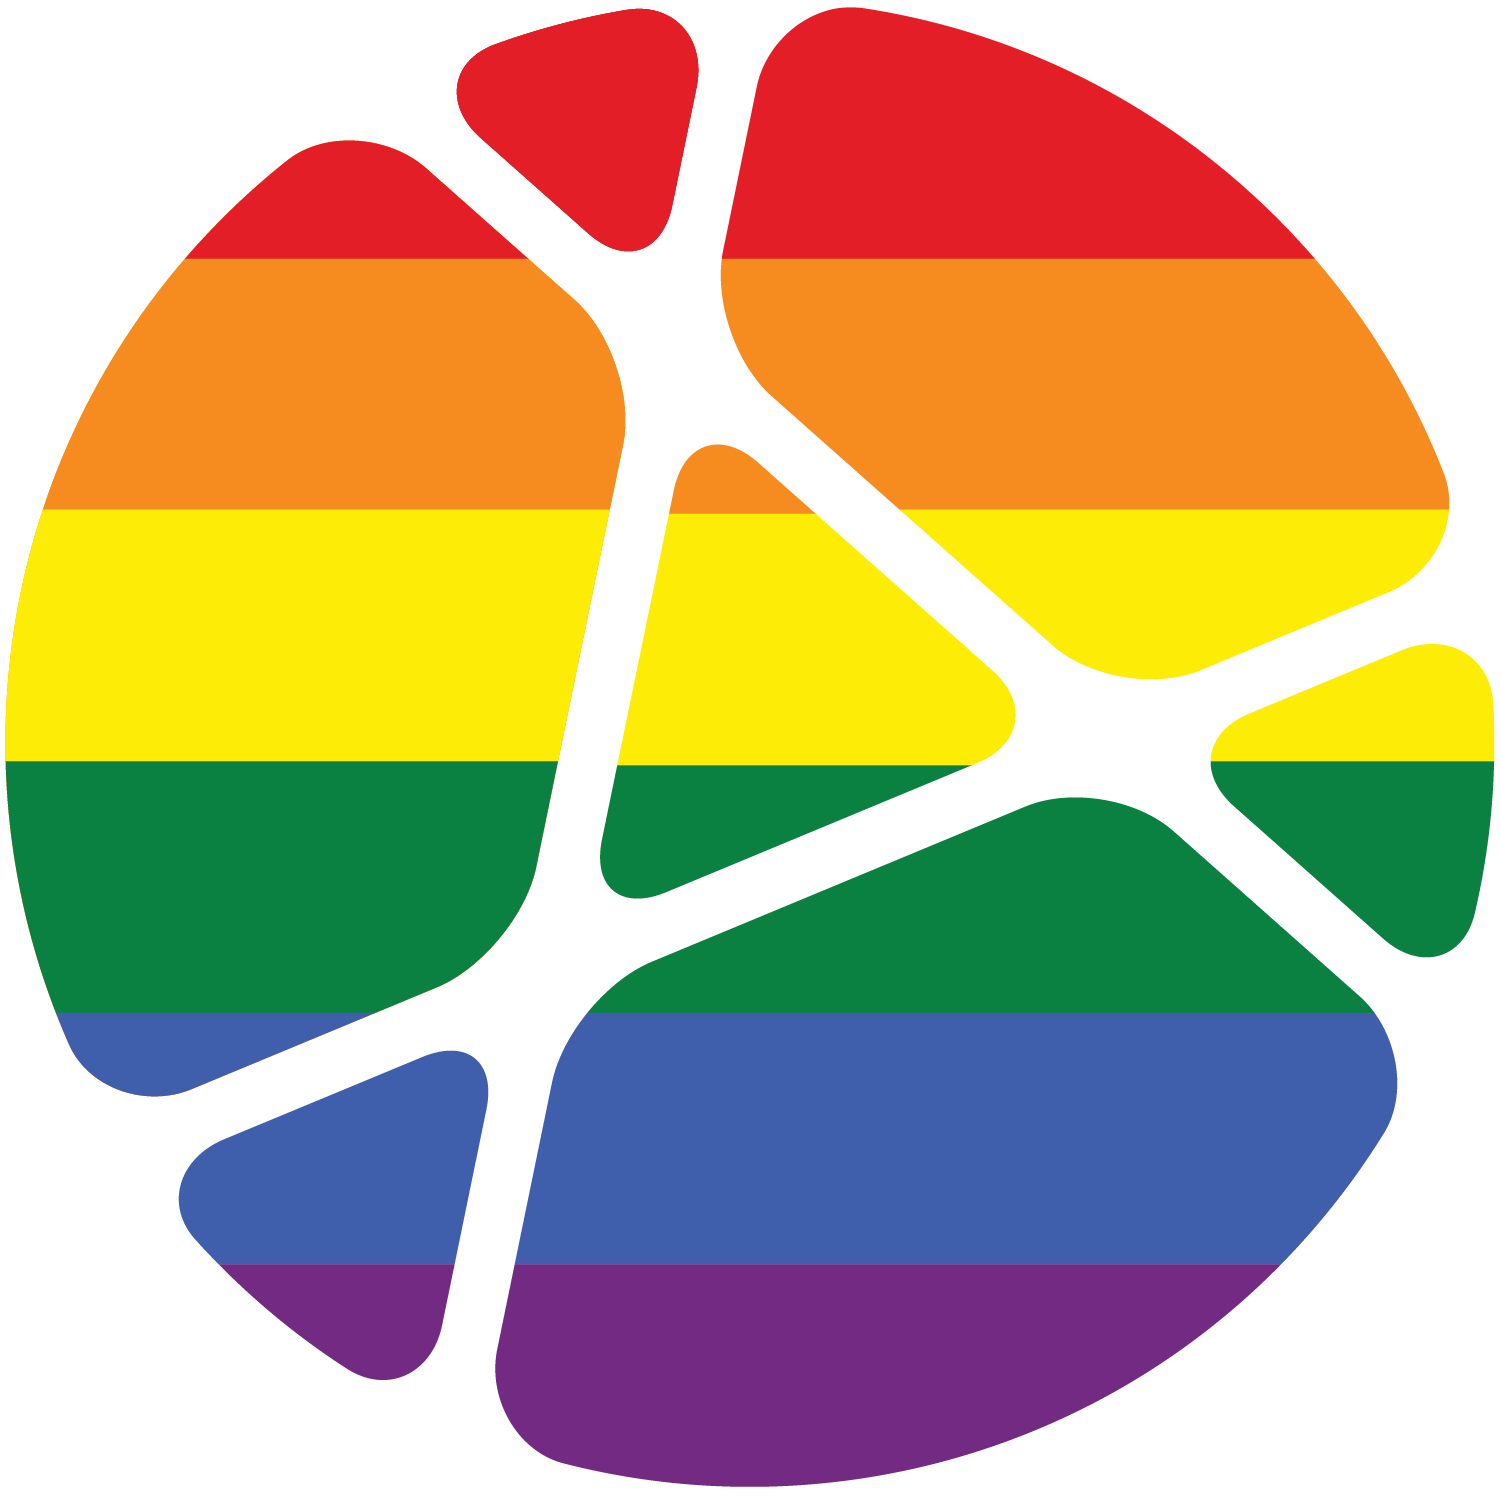 Beech Acres Parenting Center Stands in Solidarity with our LGBTQ Children, Families, and Youth and Supports the Well-being of All Families.